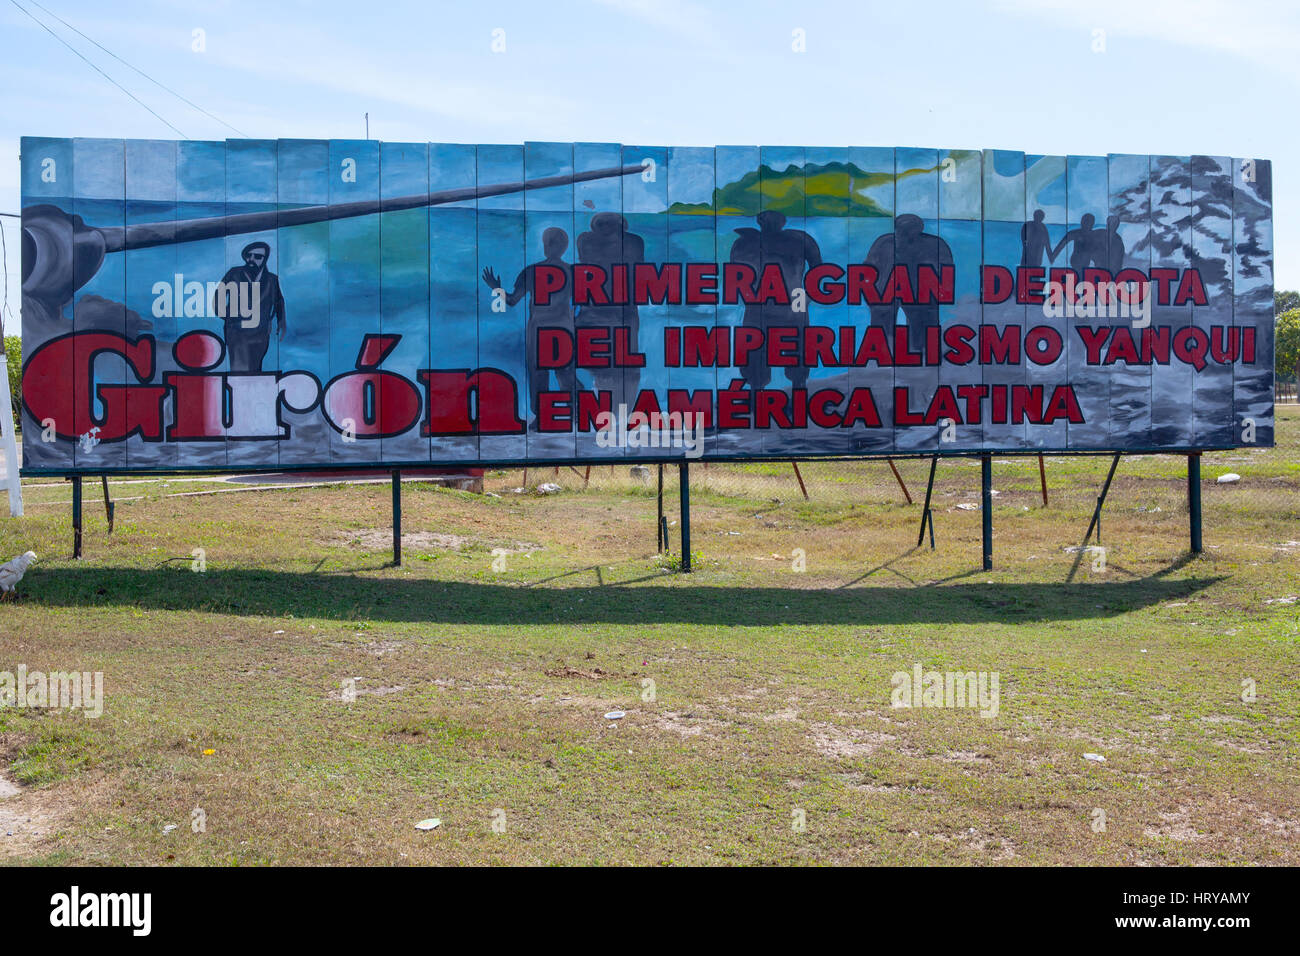 Playa Girón, Cuba, December 16, 2016: Large billboard in Giron with victory propaganda celebrating the 50th anniversary of  the Battle in 1961 in the  Stock Photo